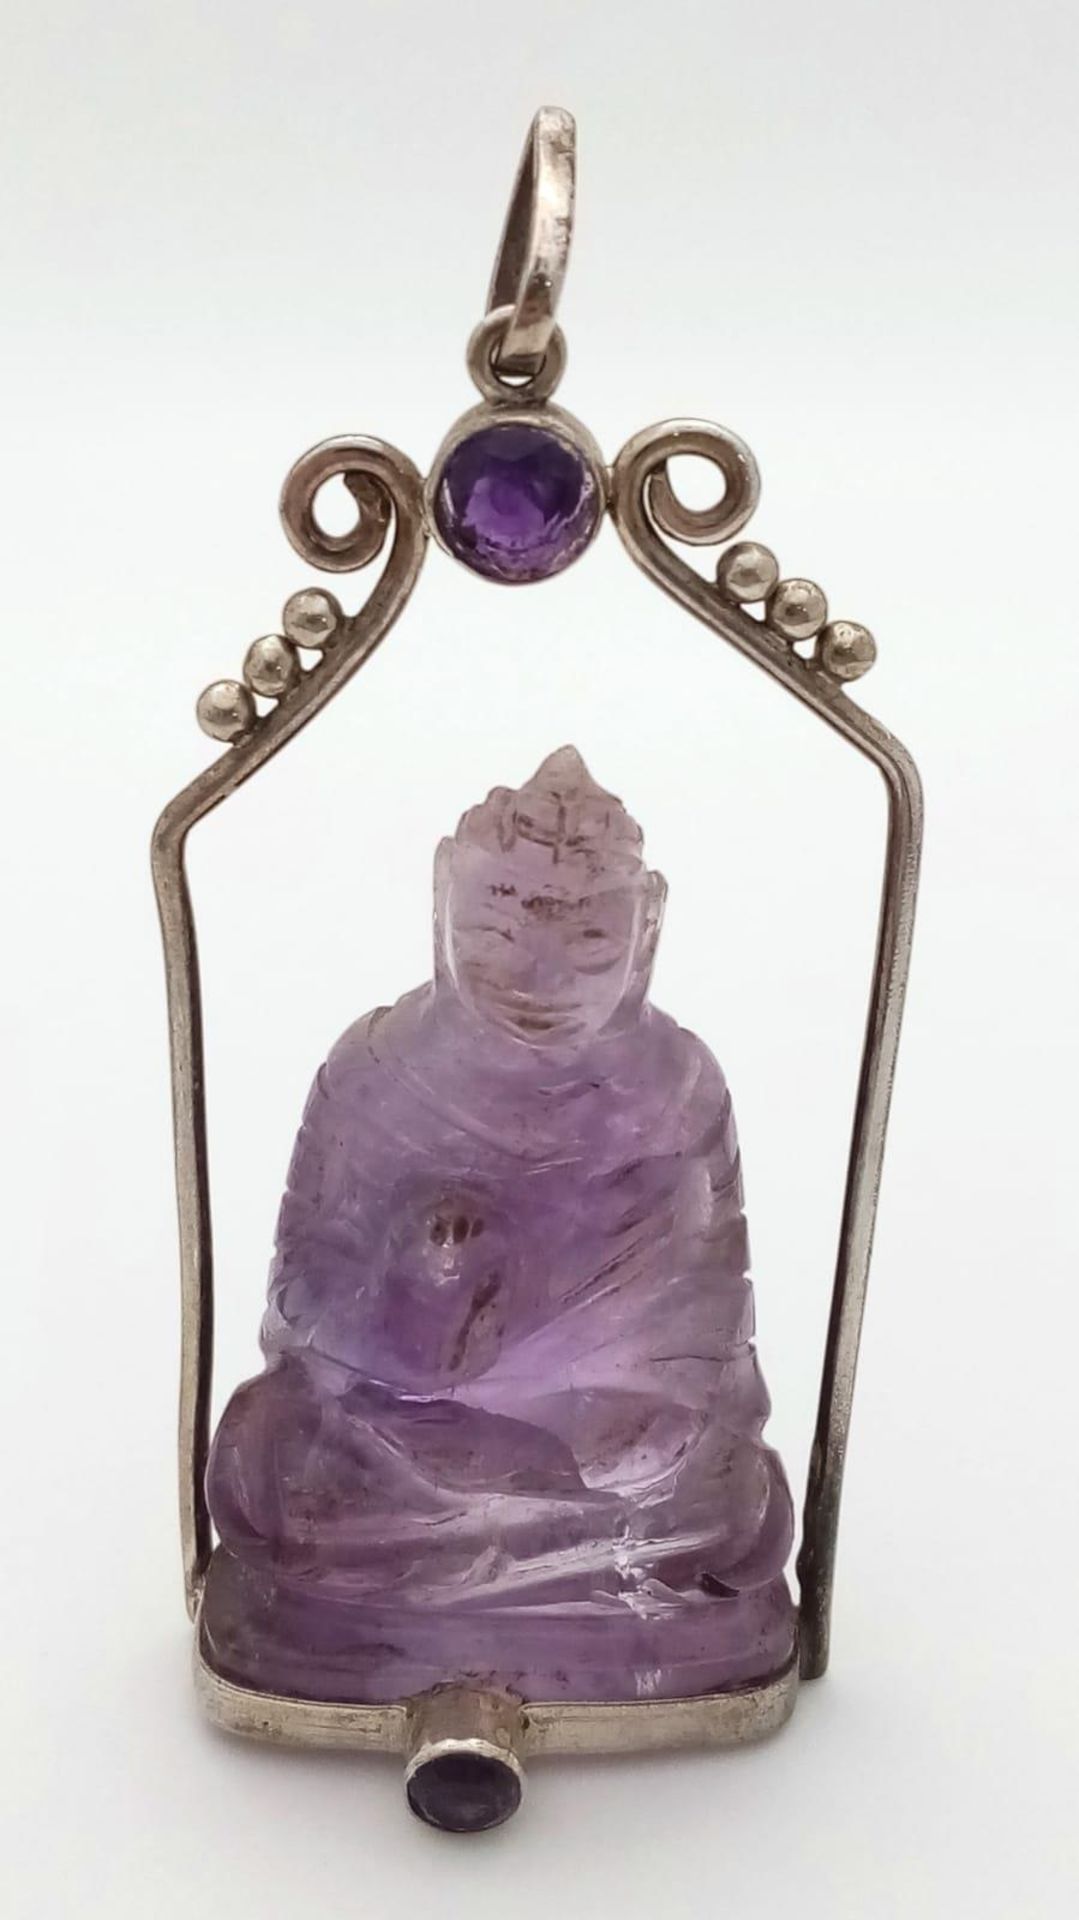 A Unique Vintage Amethyst Silver Mounted Buddha/Deity Pendant. The Carved Buddha measures 4.5cm Long